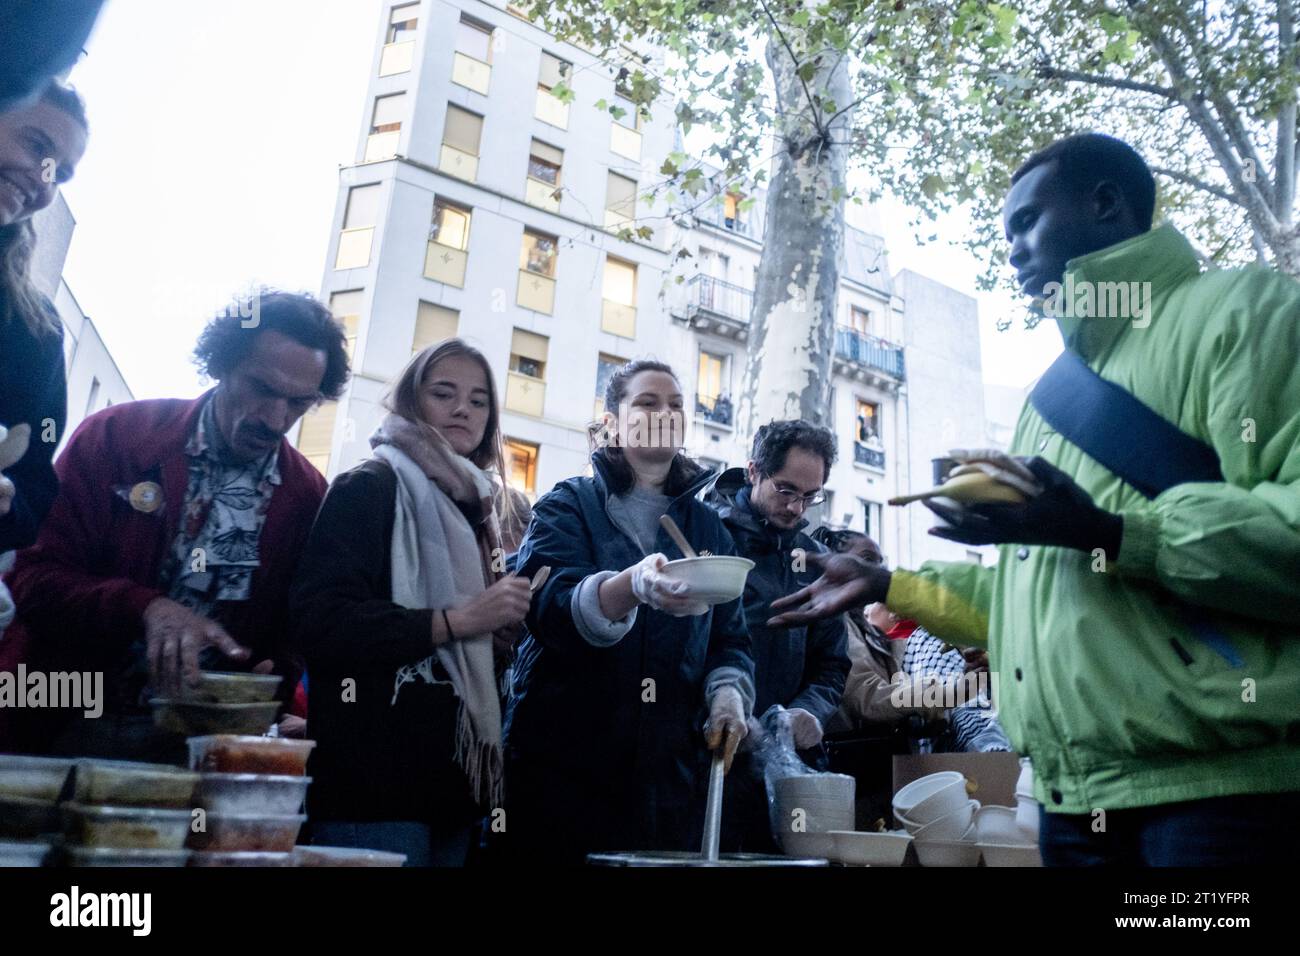 Paris, France. 15th Oct, 2023. Michael Bunel/Le Pictorium - Food distribution under the La Chapelle metro station - 15/10/2023 - France/France/Paris - Food distribution under the La Chapelle metro station organized by various associations and NGOs (Utopia 56, MDM, tendre la main, paris exil, la chorba, solidarite migrant wilson .). For the past week, a prefectoral decree has prohibited food aid for refugees, migrants and exiles in several streets in northern Paris. October 15, 2023. Paris, France. Credit: LE PICTORIUM/Alamy Live News Stock Photo